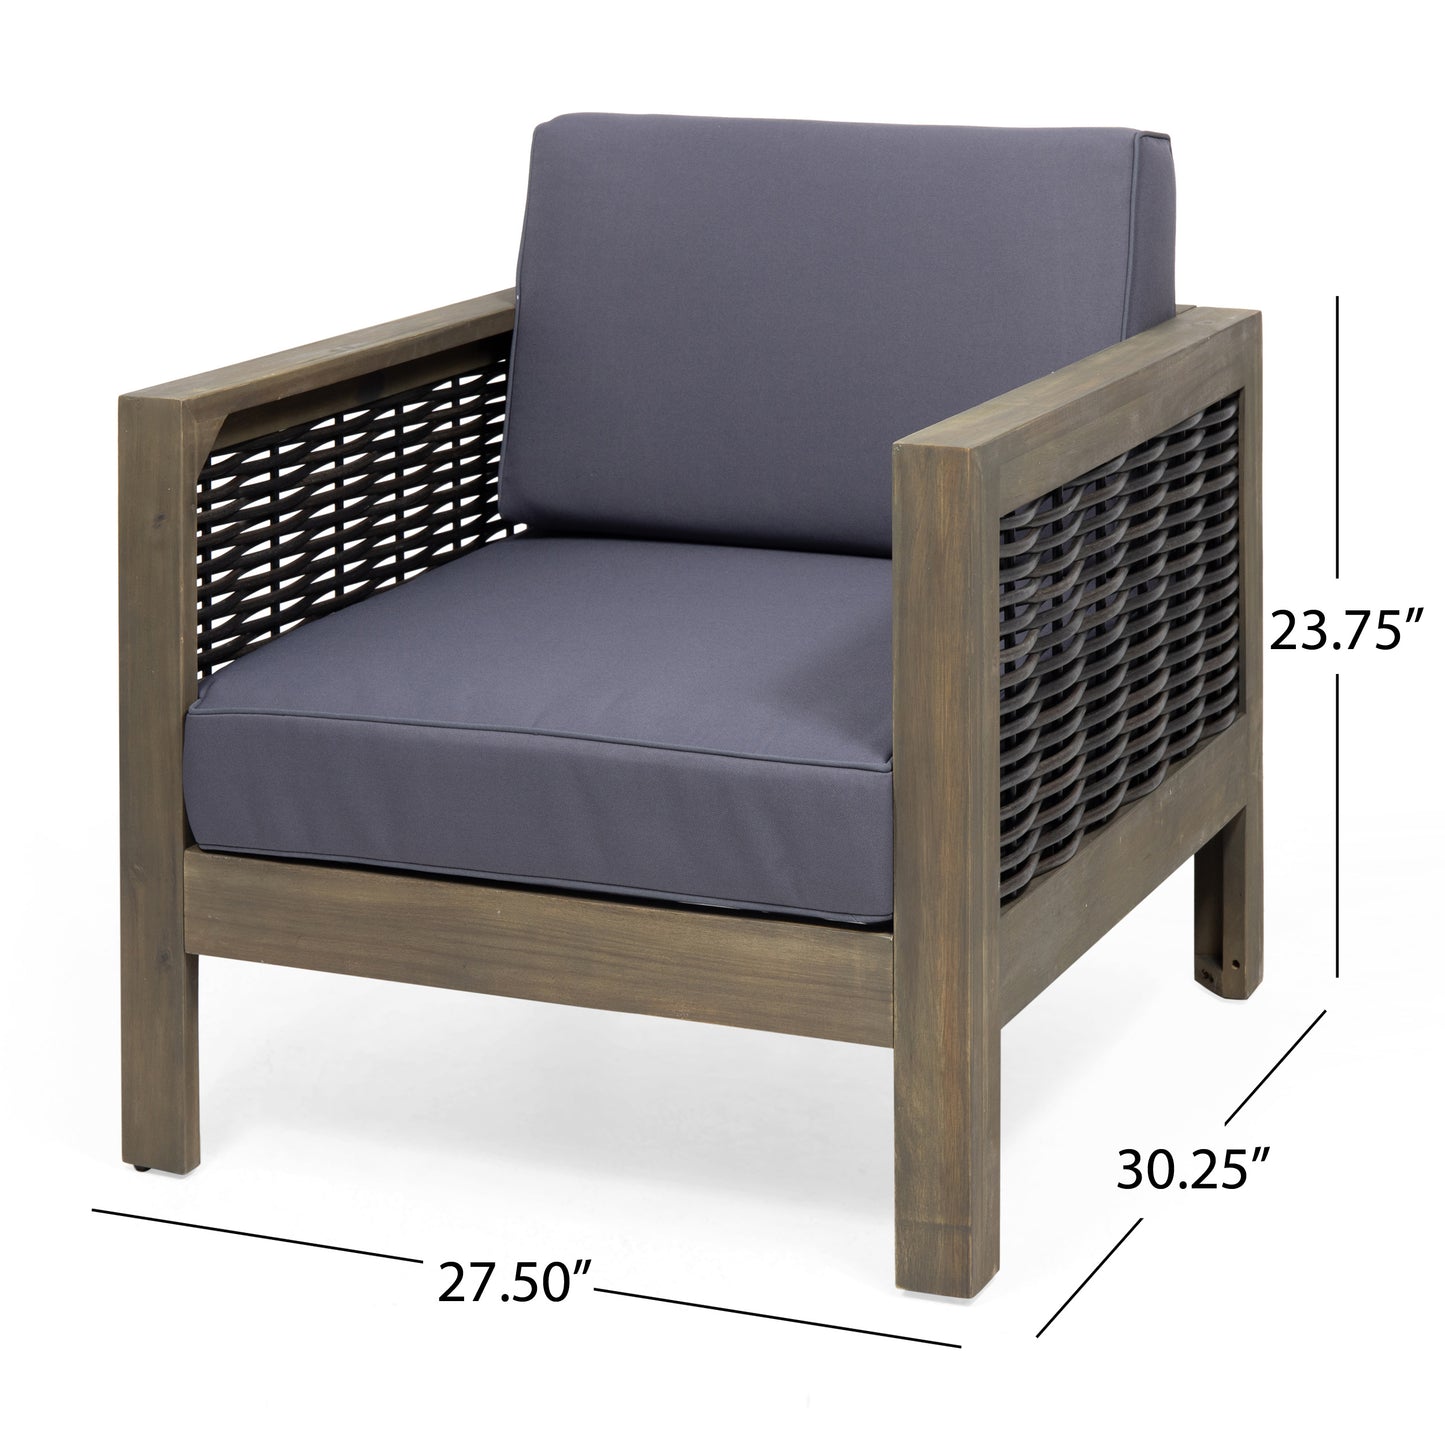 Allegra Outdoor Acacia Wood and Wicker Club Chair